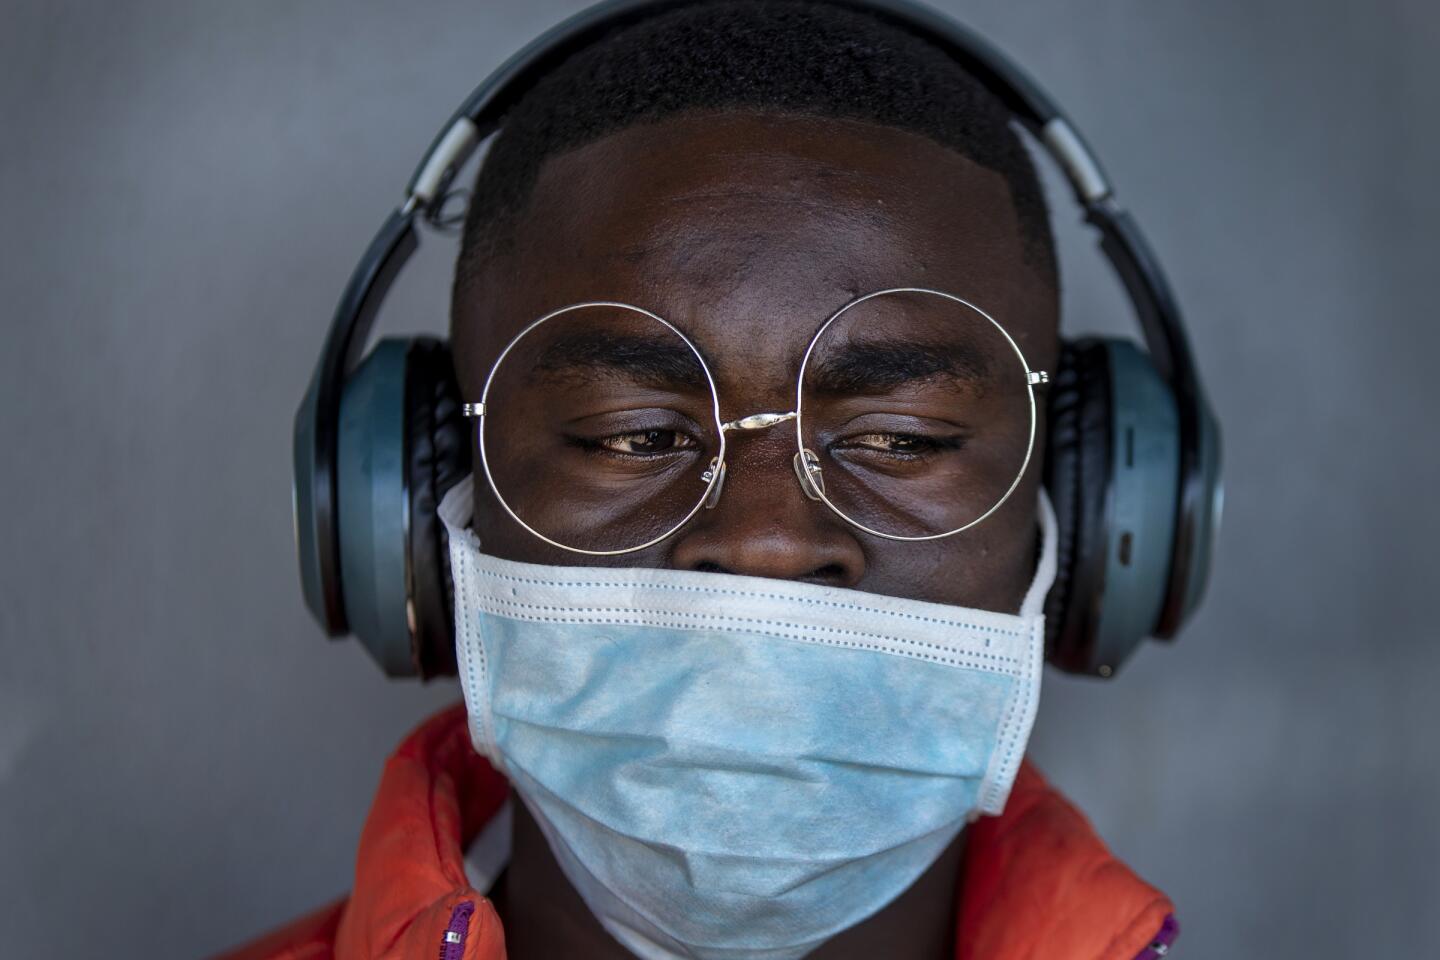 South Africa: A barber wears a surgical mask at a hair salon in Soweto, South Africa.